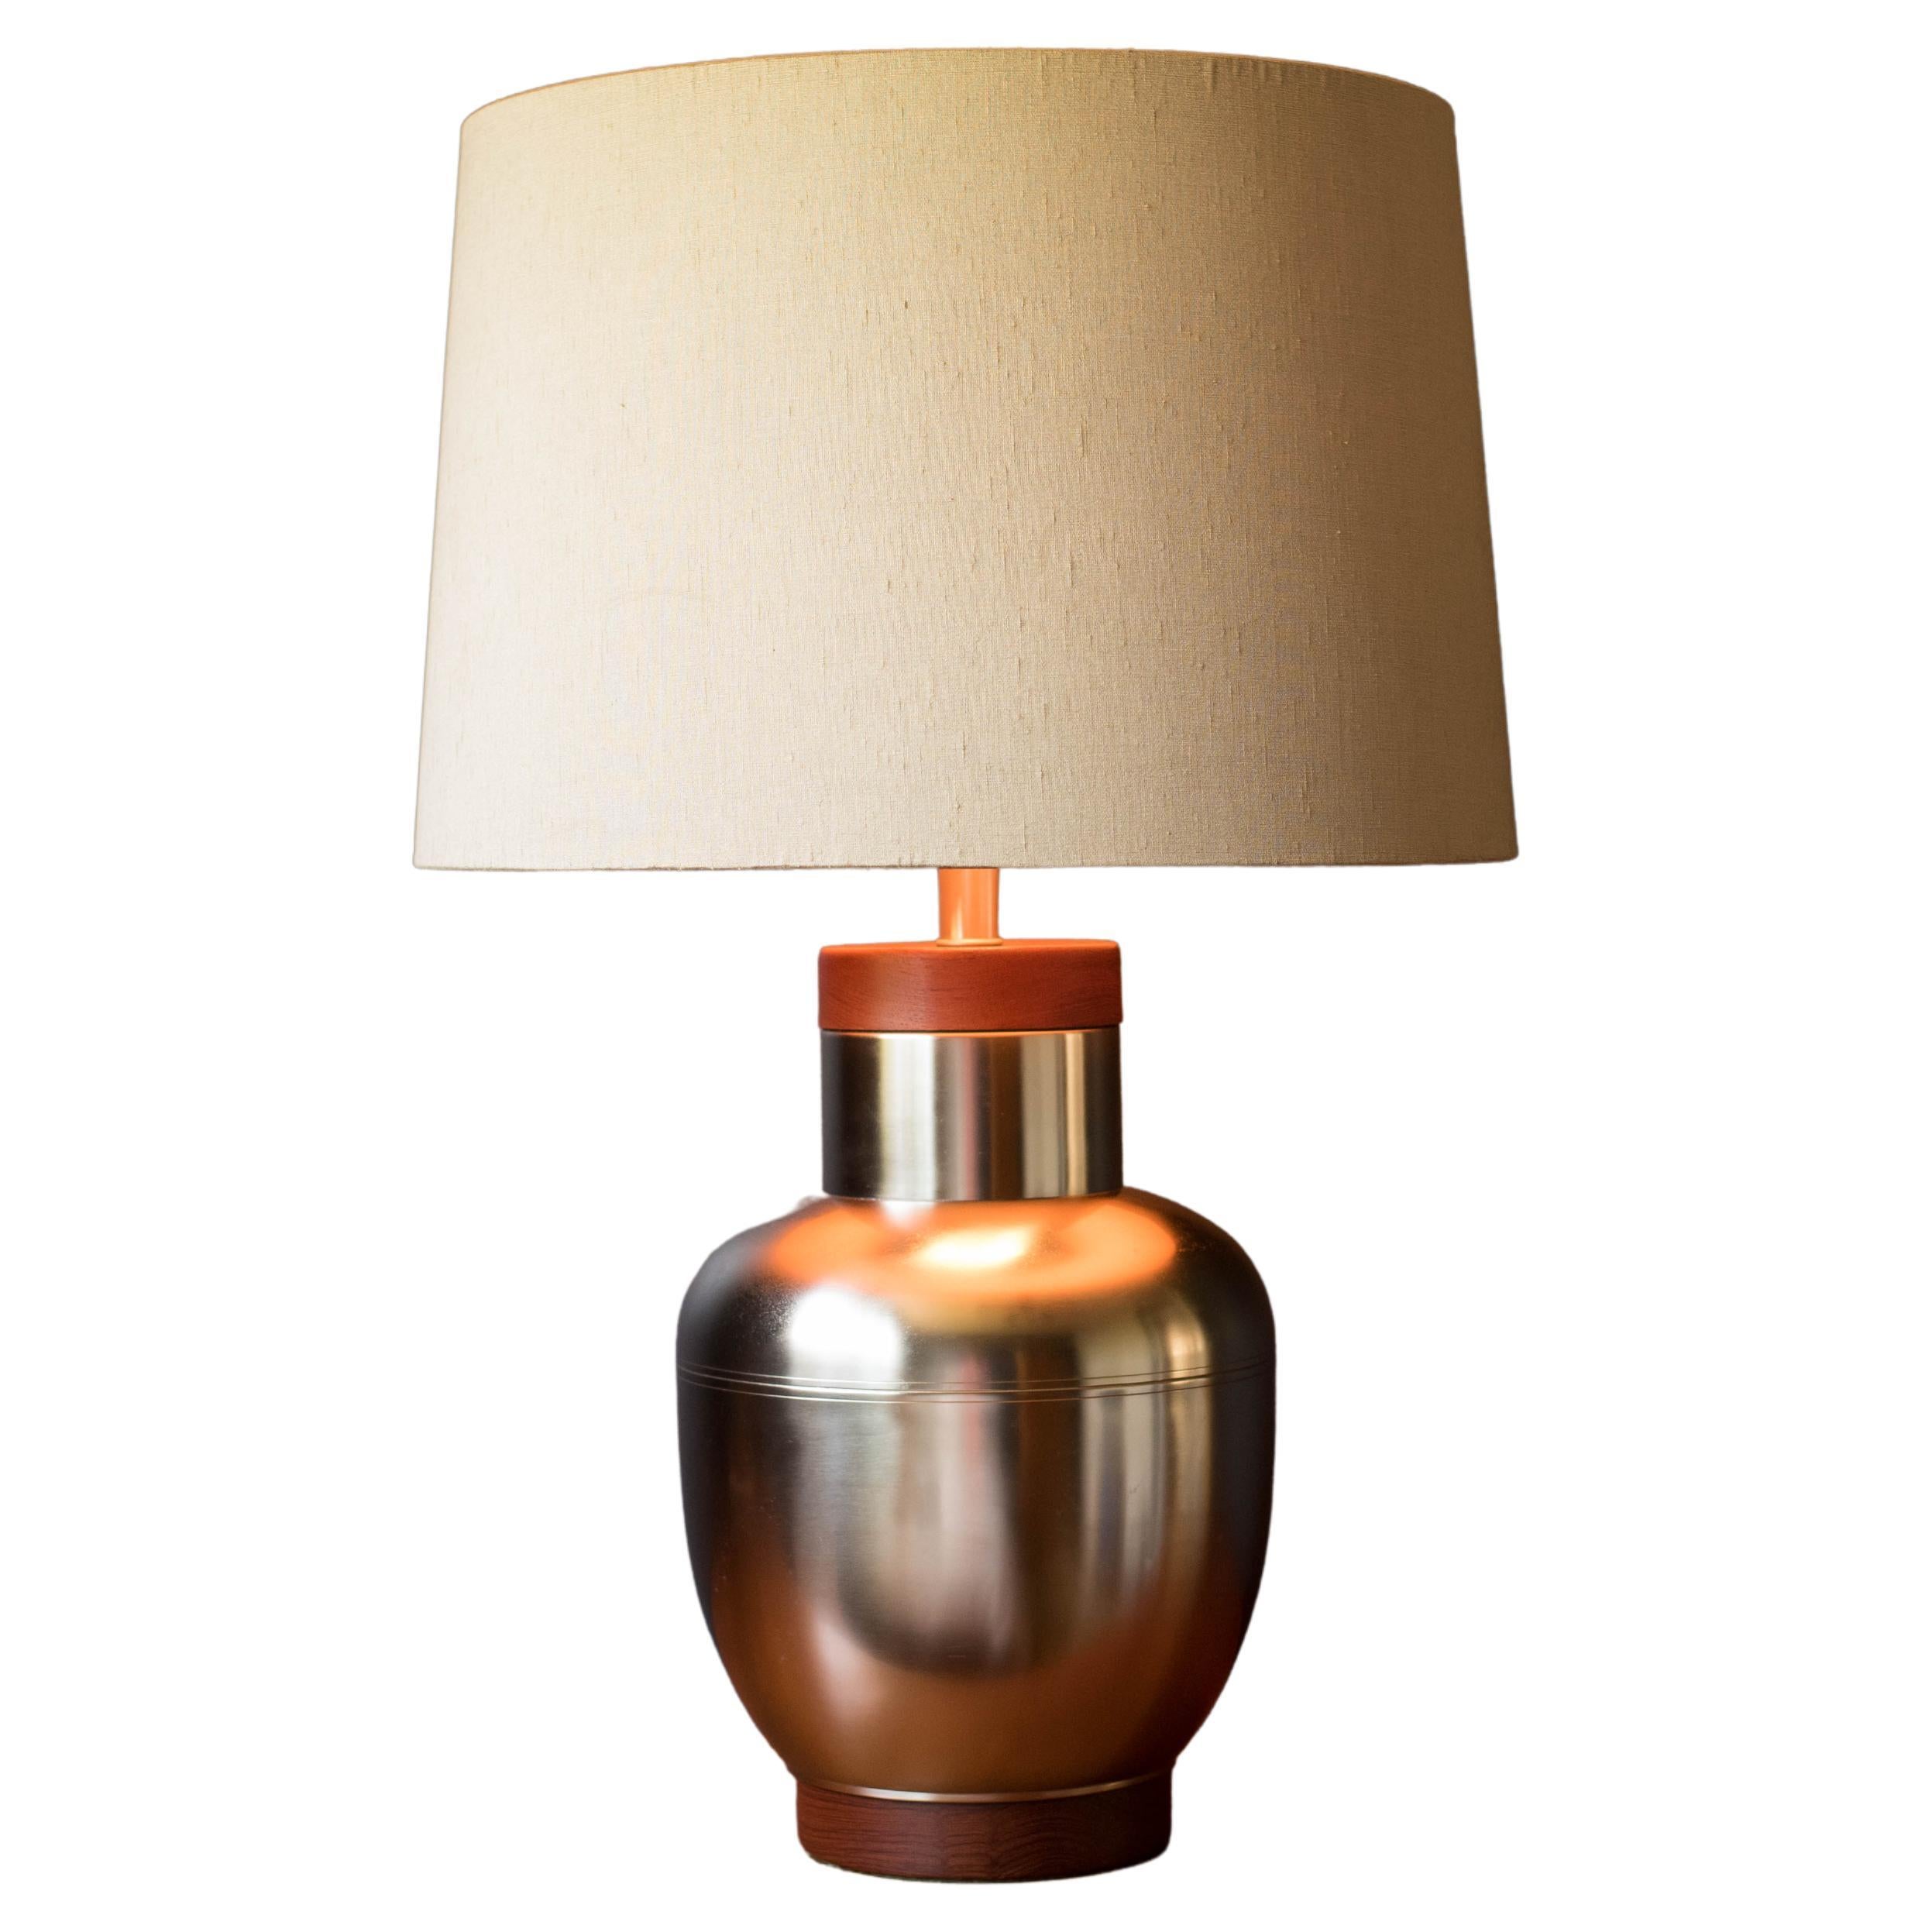 Vintage Stainless Steel and Teak Accent Table Lamp For Sale